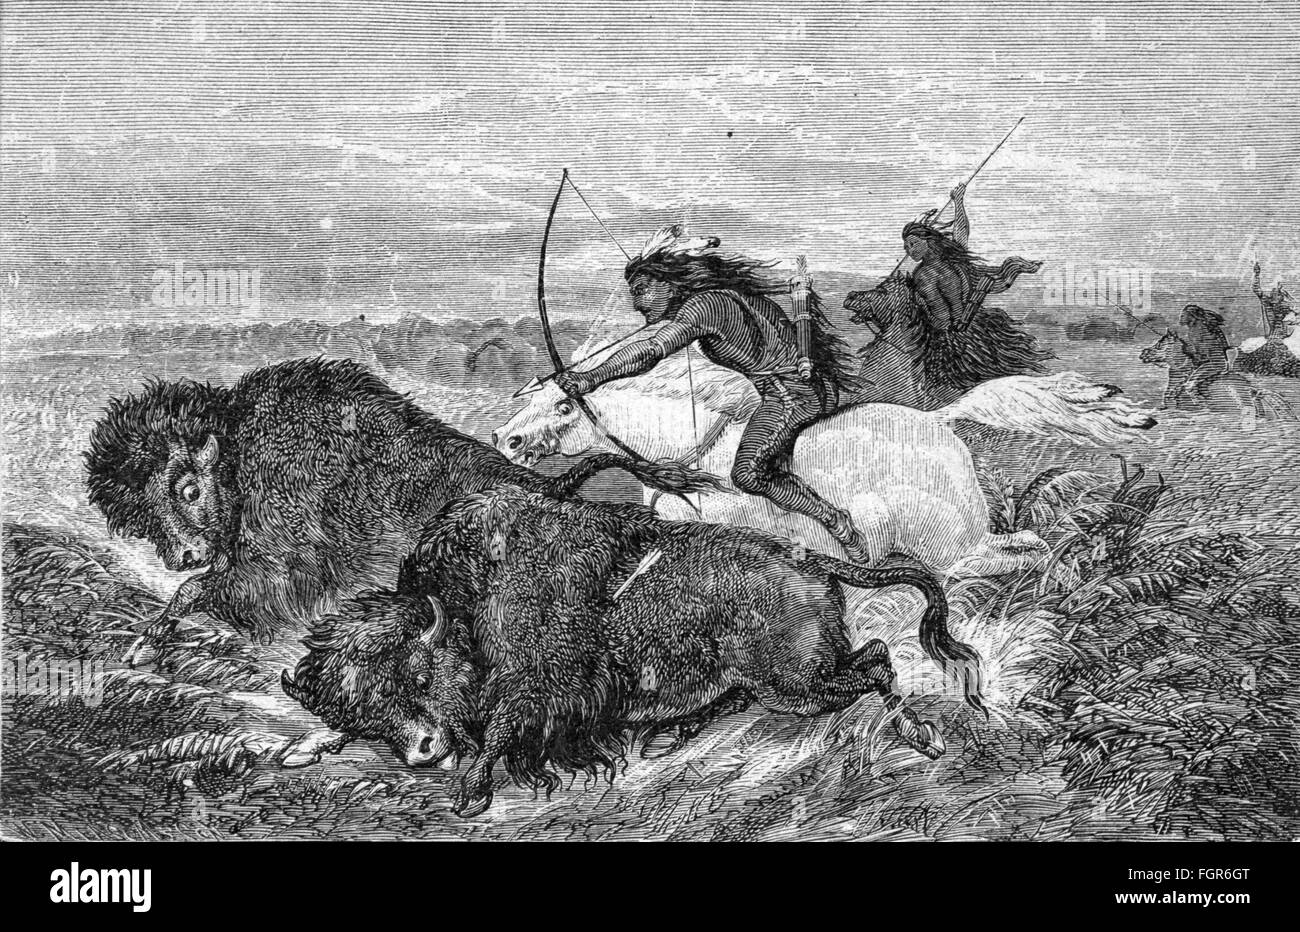 hunt, buffalo, bison hunt in North America, American Indians hunting bisons in of the prairie, wood engraving, 2nd half 19th century, buffalo hunt, weapons, arms, weapon, arm, bow and arrow, American bison, people, hunter, hunters, hunting, USA, United States of America, hunt, hunts, buffalo, buffalos, Native Americans, historic, historical, Additional-Rights-Clearences-Not Available Stock Photo